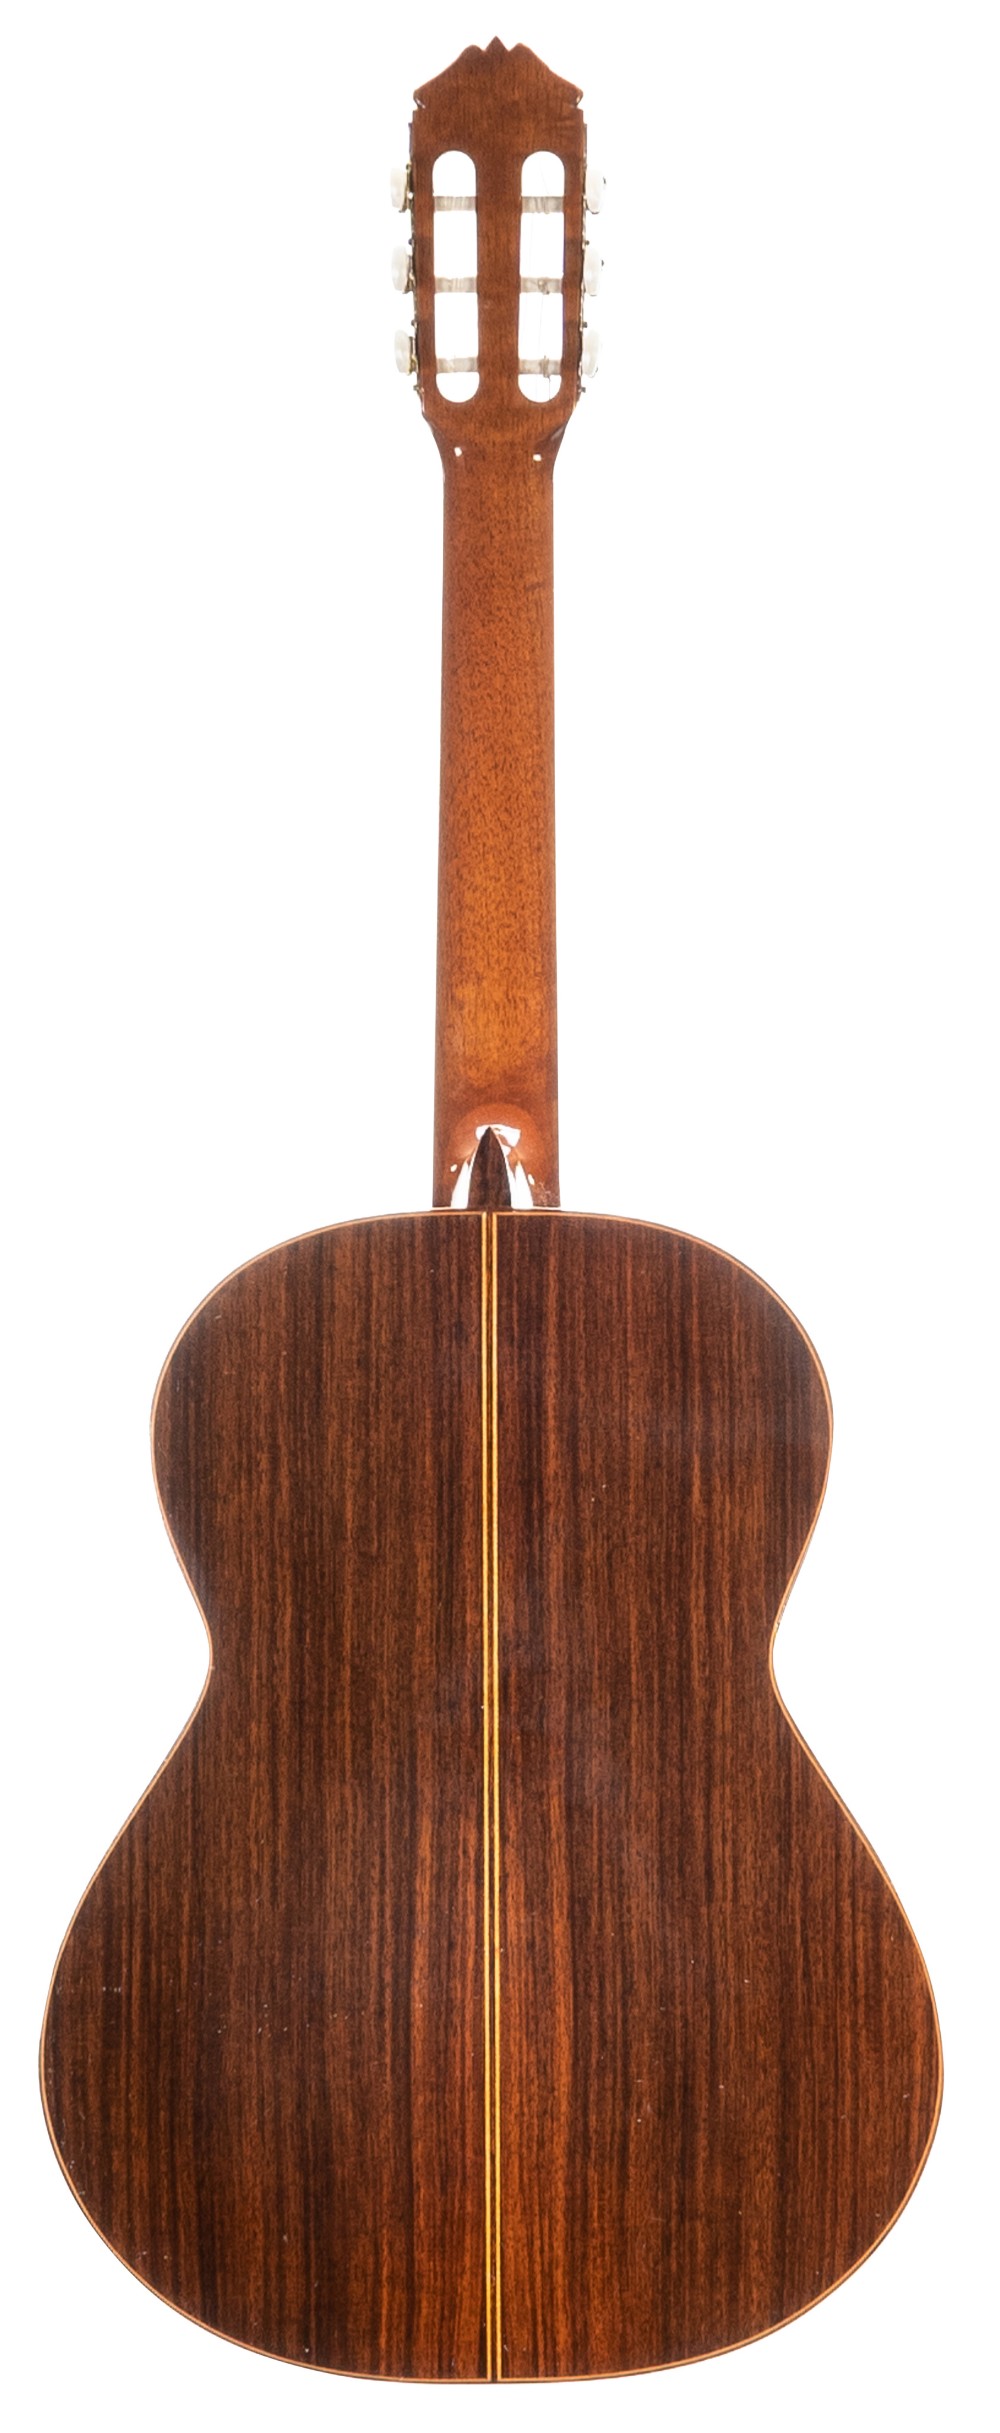 1982 José Ramirez guitar, made in Madrid, Spain; Back and sides: Indian rosewood, minor surface - Image 2 of 2